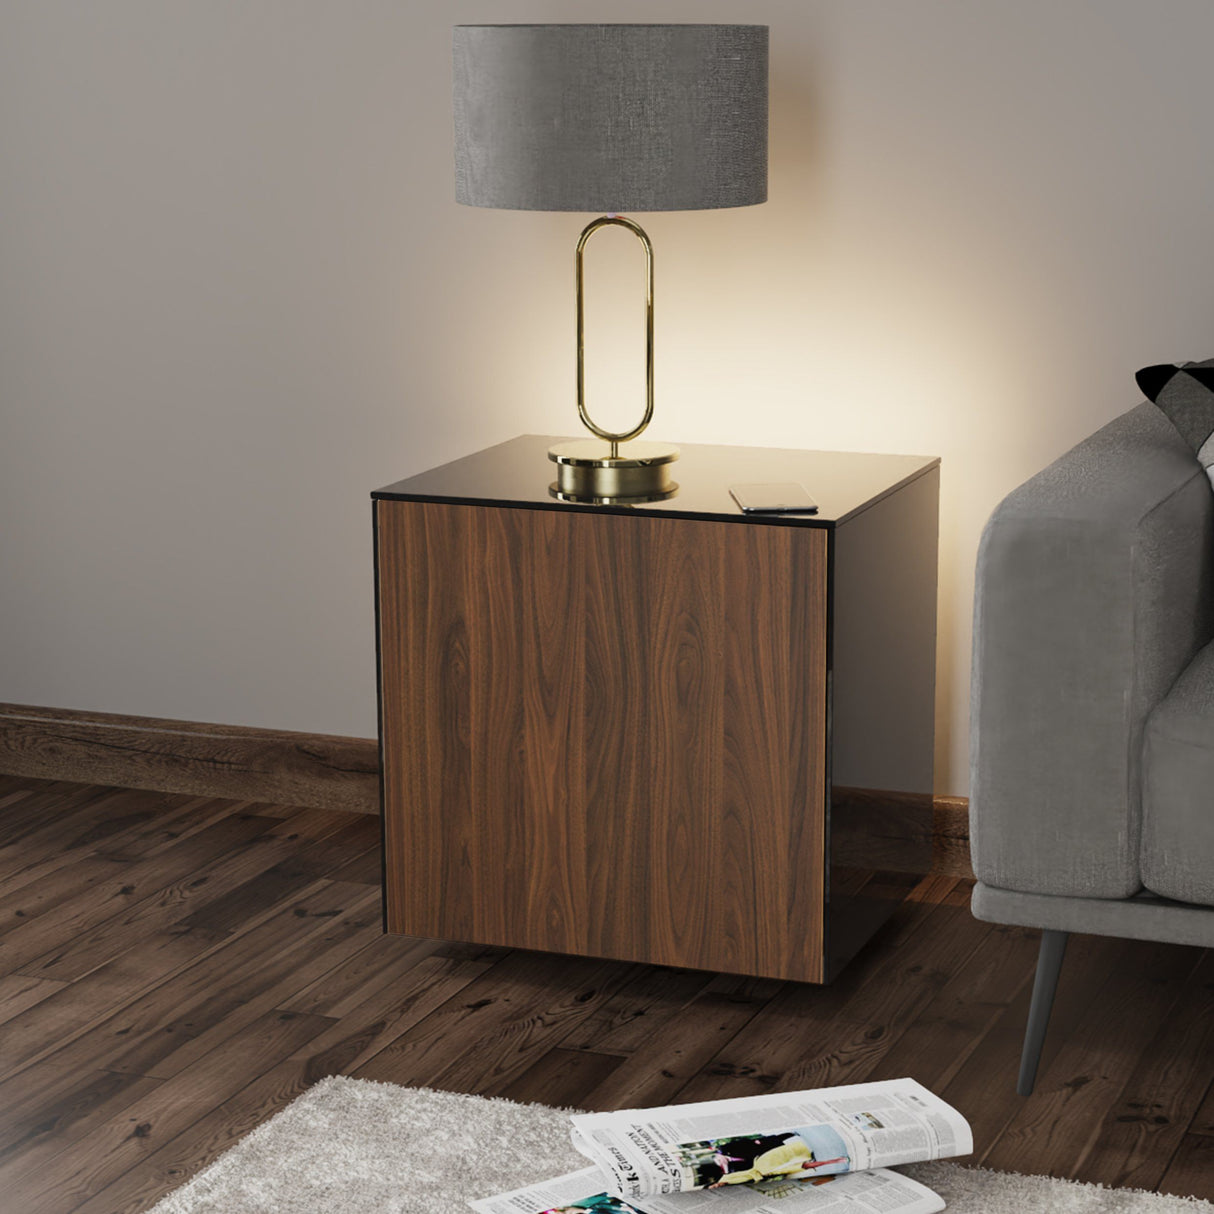 Frank Olsen Black and Walnut Lamp Table with LED Lighting and Wireless Phone Charging